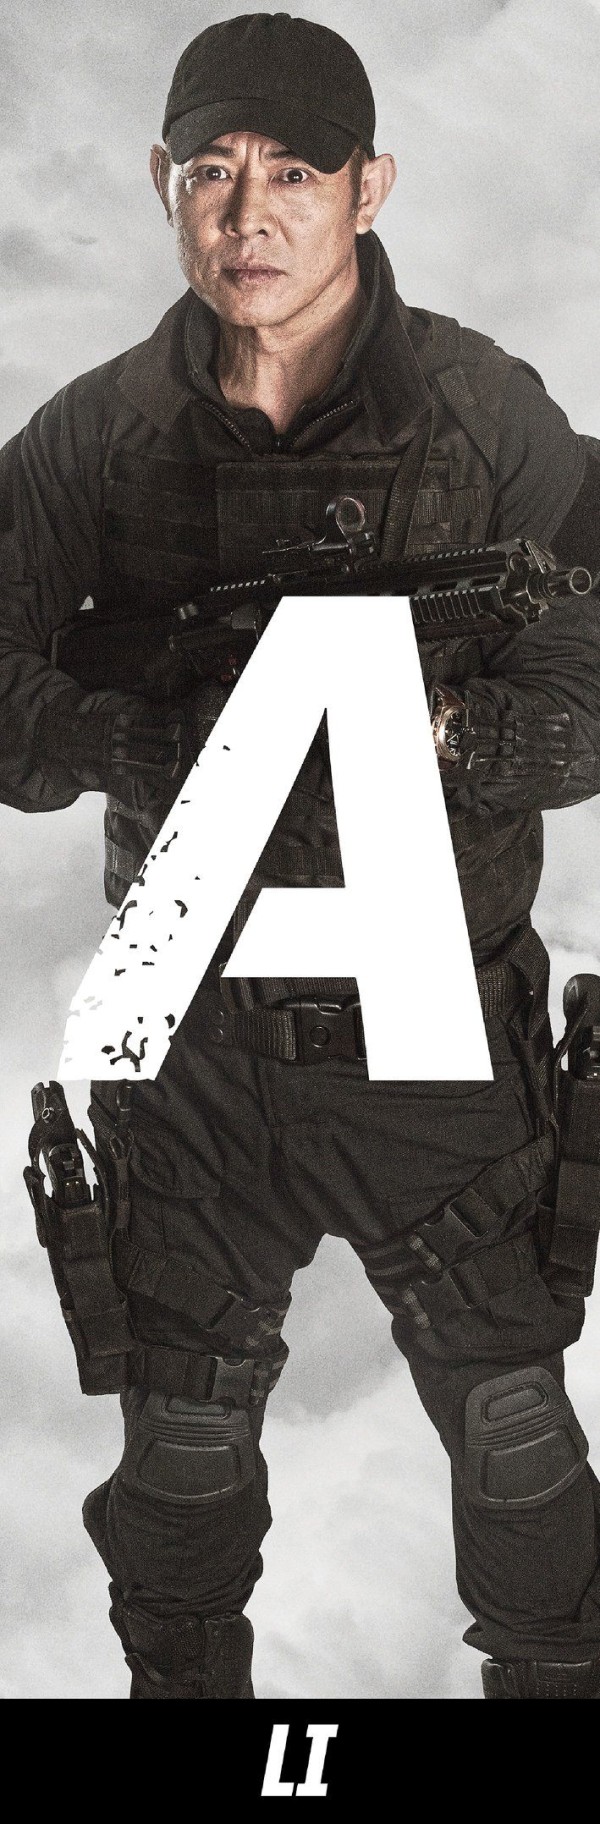 Expendables 3 - Affiches